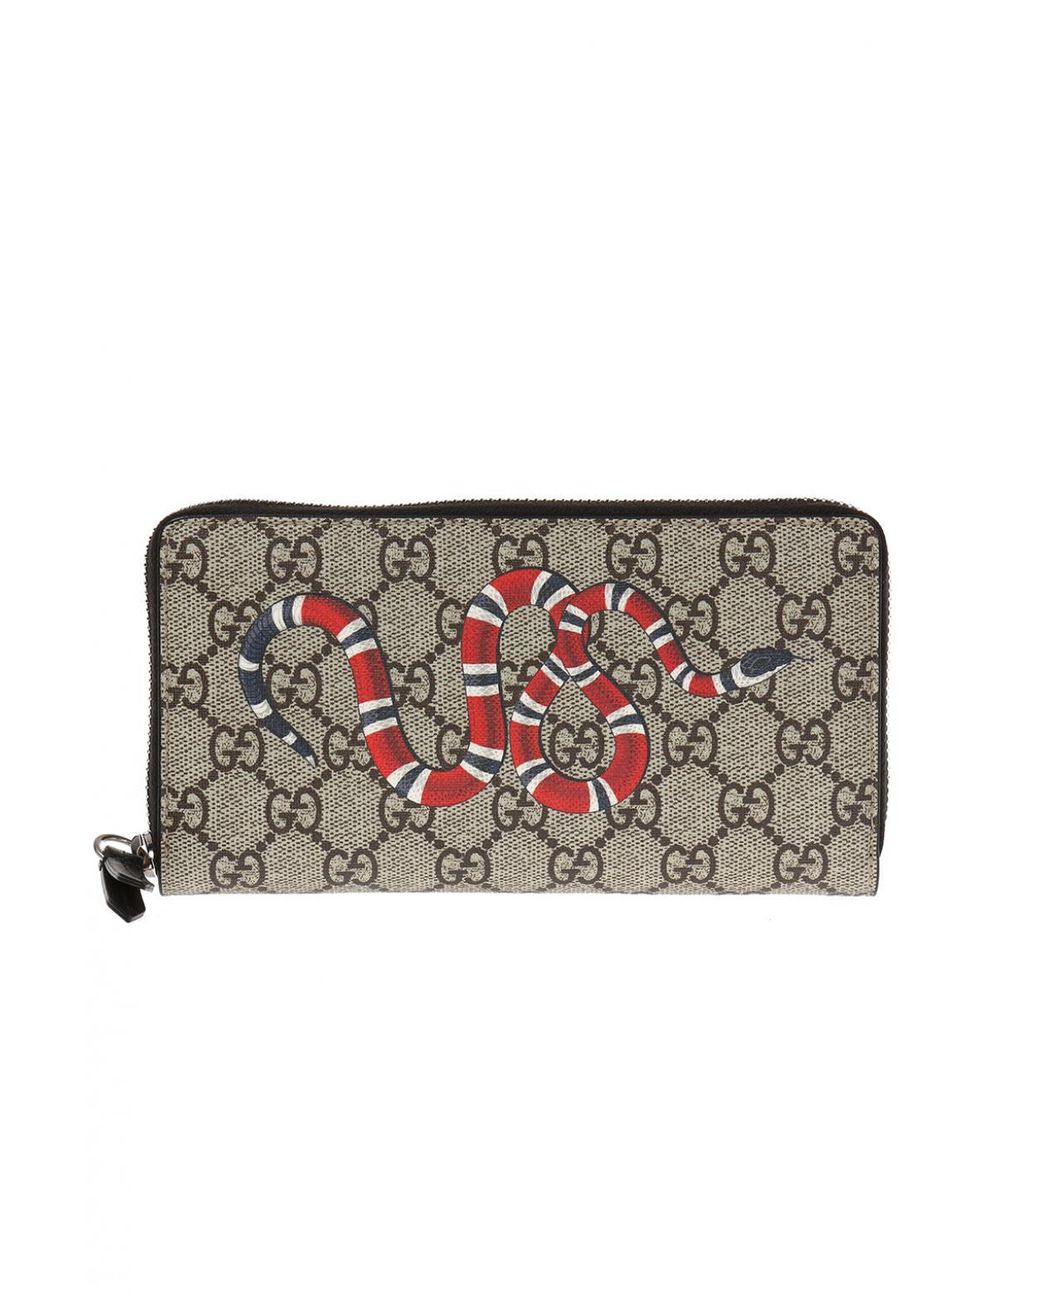 New Gucci Unisex Black Supreme GG Zip Wallet with Snake Print 575364 1058